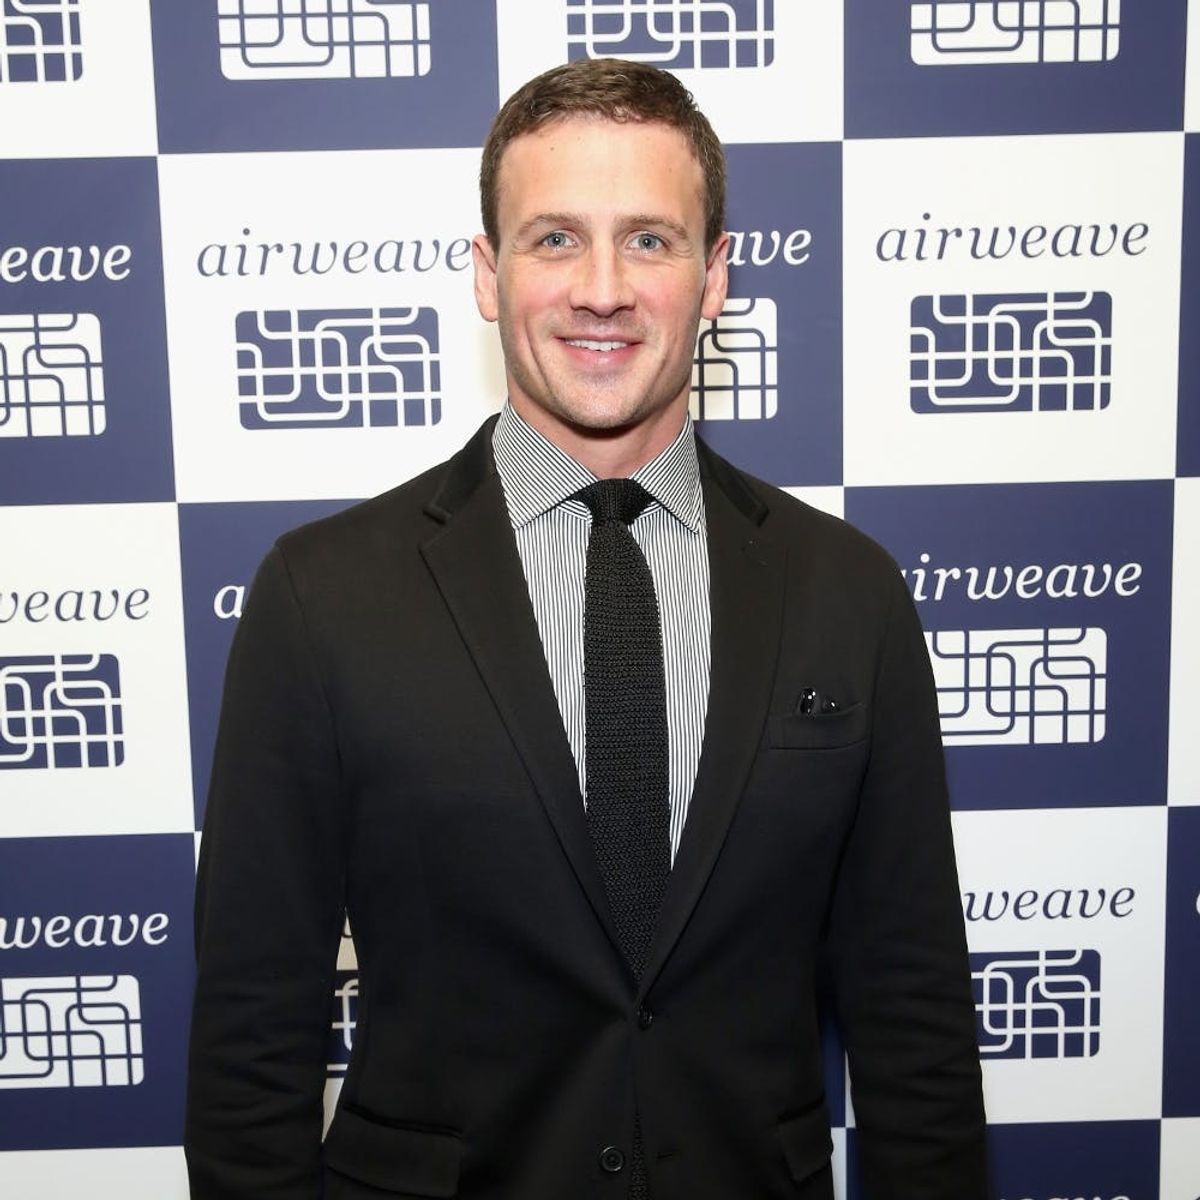 Ryan Lochte Has Now Been Charged for Filing a False Robbery Report